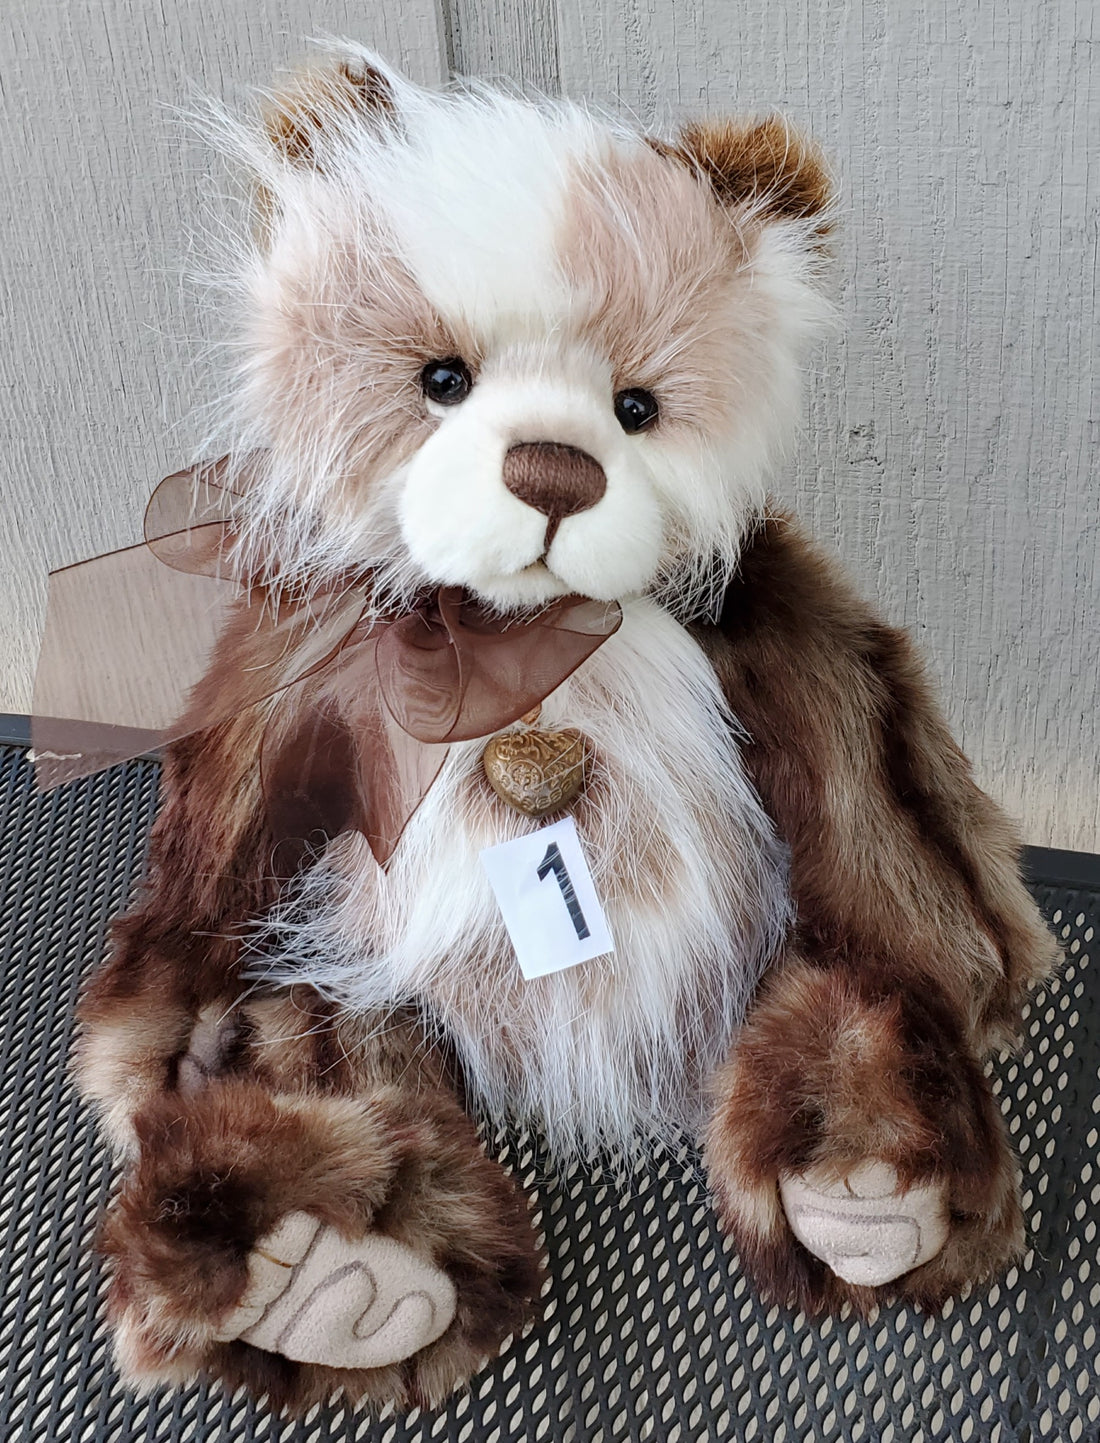 Kevin - 14.5" Bear w/ Multiple Kinds of Plush by Charlie Bears